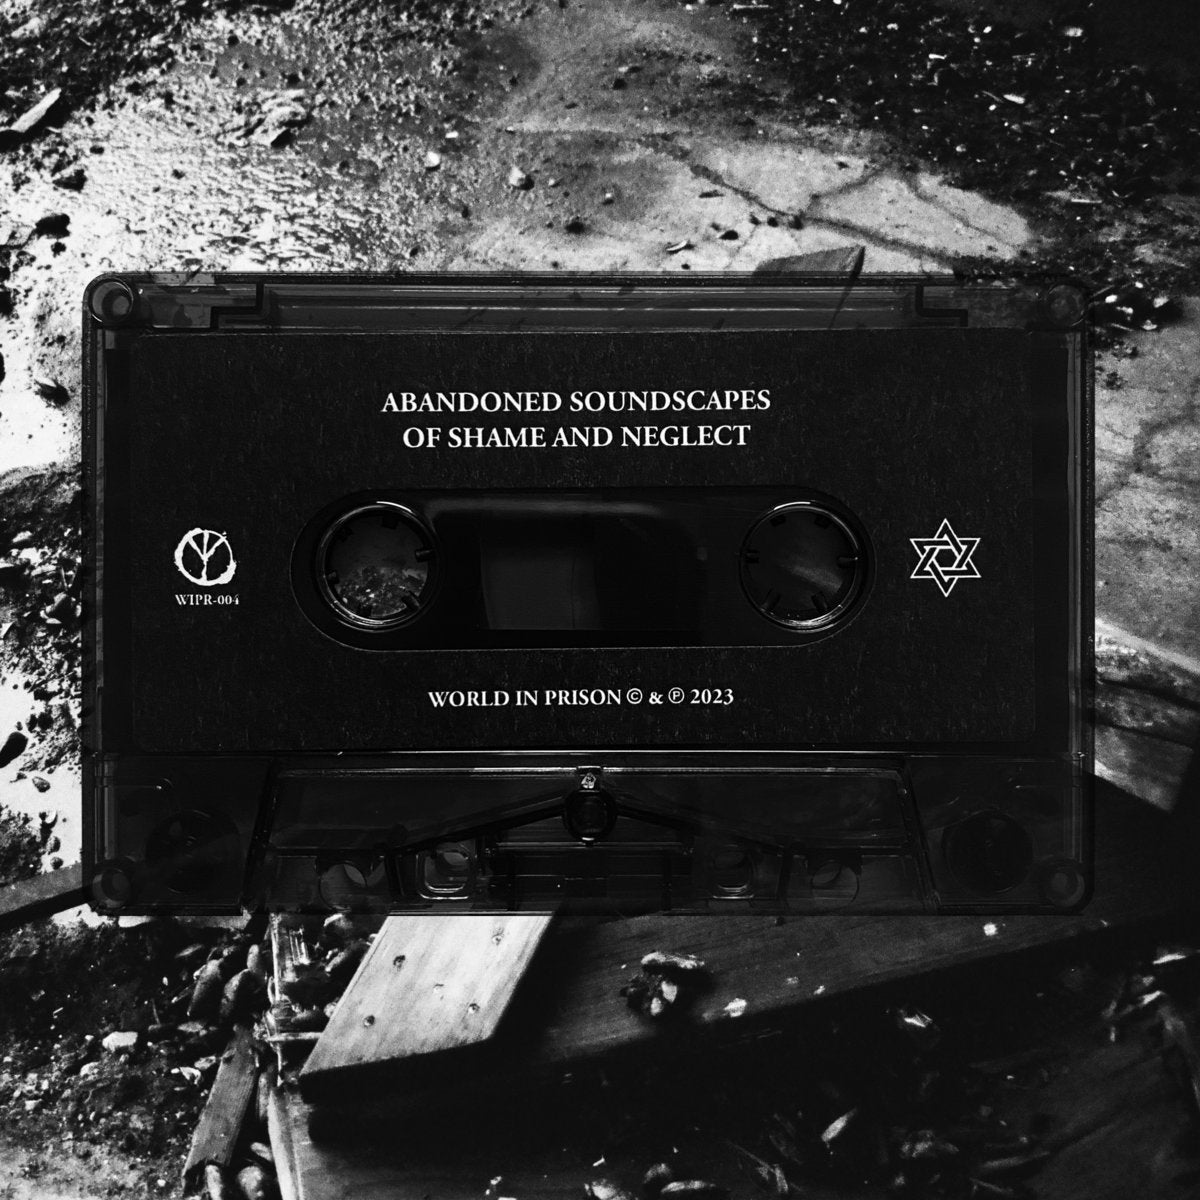 [SOLD OUT] AVUDIM "Abandoned Soundscapes of Shame and Neglect" Cassette Tape